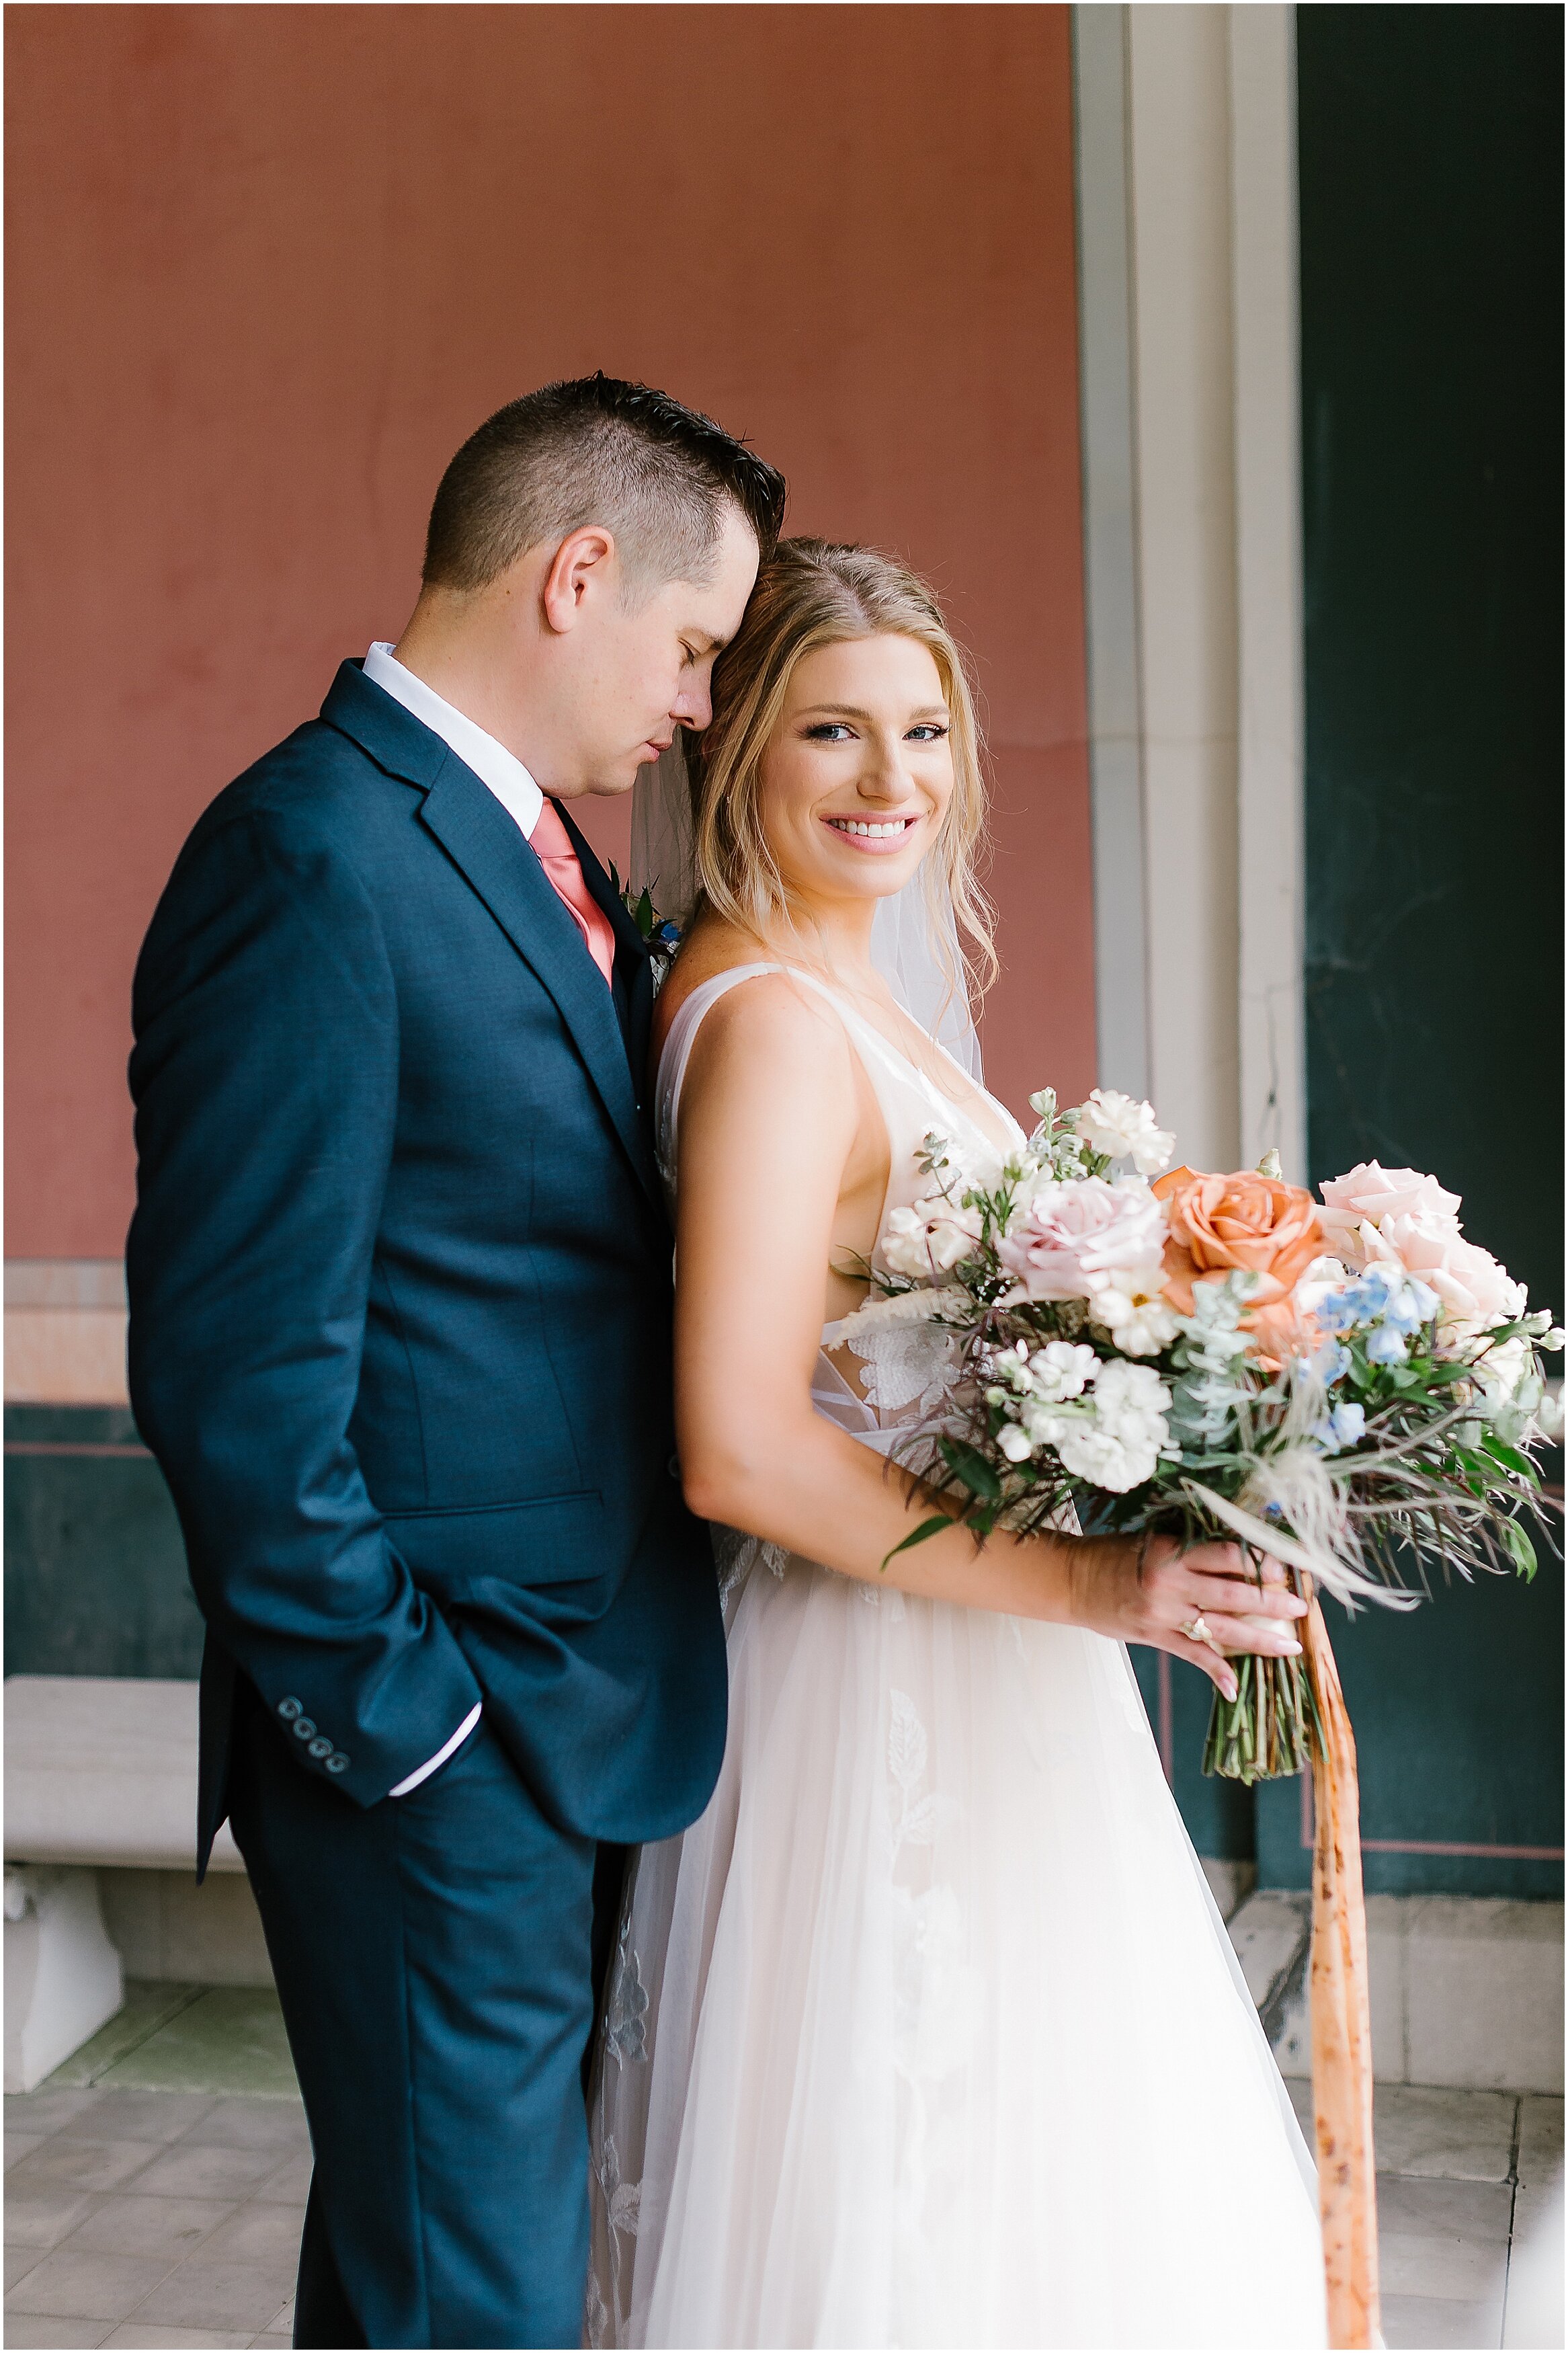 Rebecca Shehorn Photography Colleen and Kyle Inn at Irwin Gardens Wedding-399_The Commons Columbus Inn at Irwin Garden Indianapolis Wedding Photographer.jpg